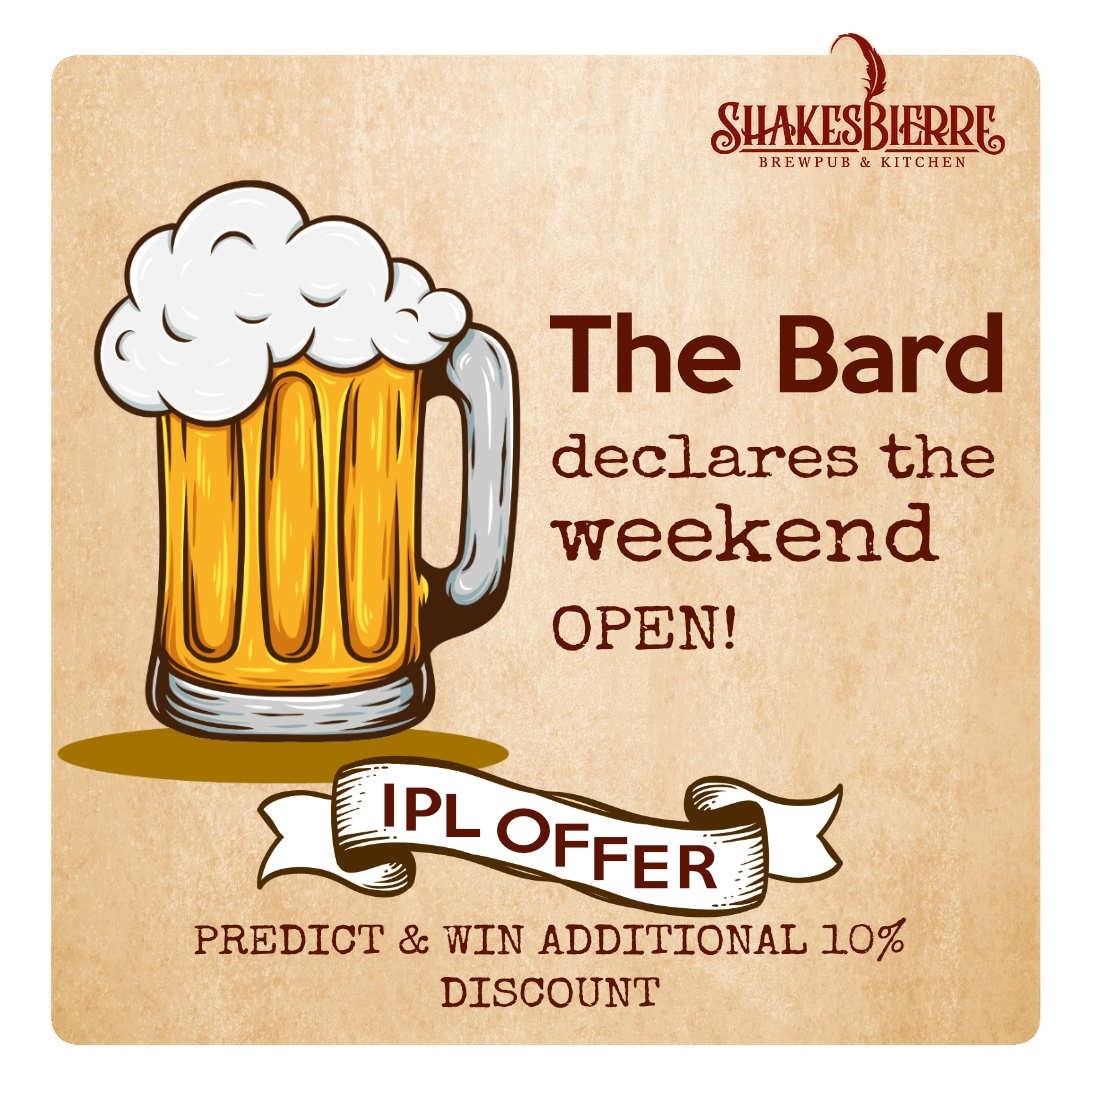 ShakesBierre Microbrewery Social Media &amp; Events Designs Image 1